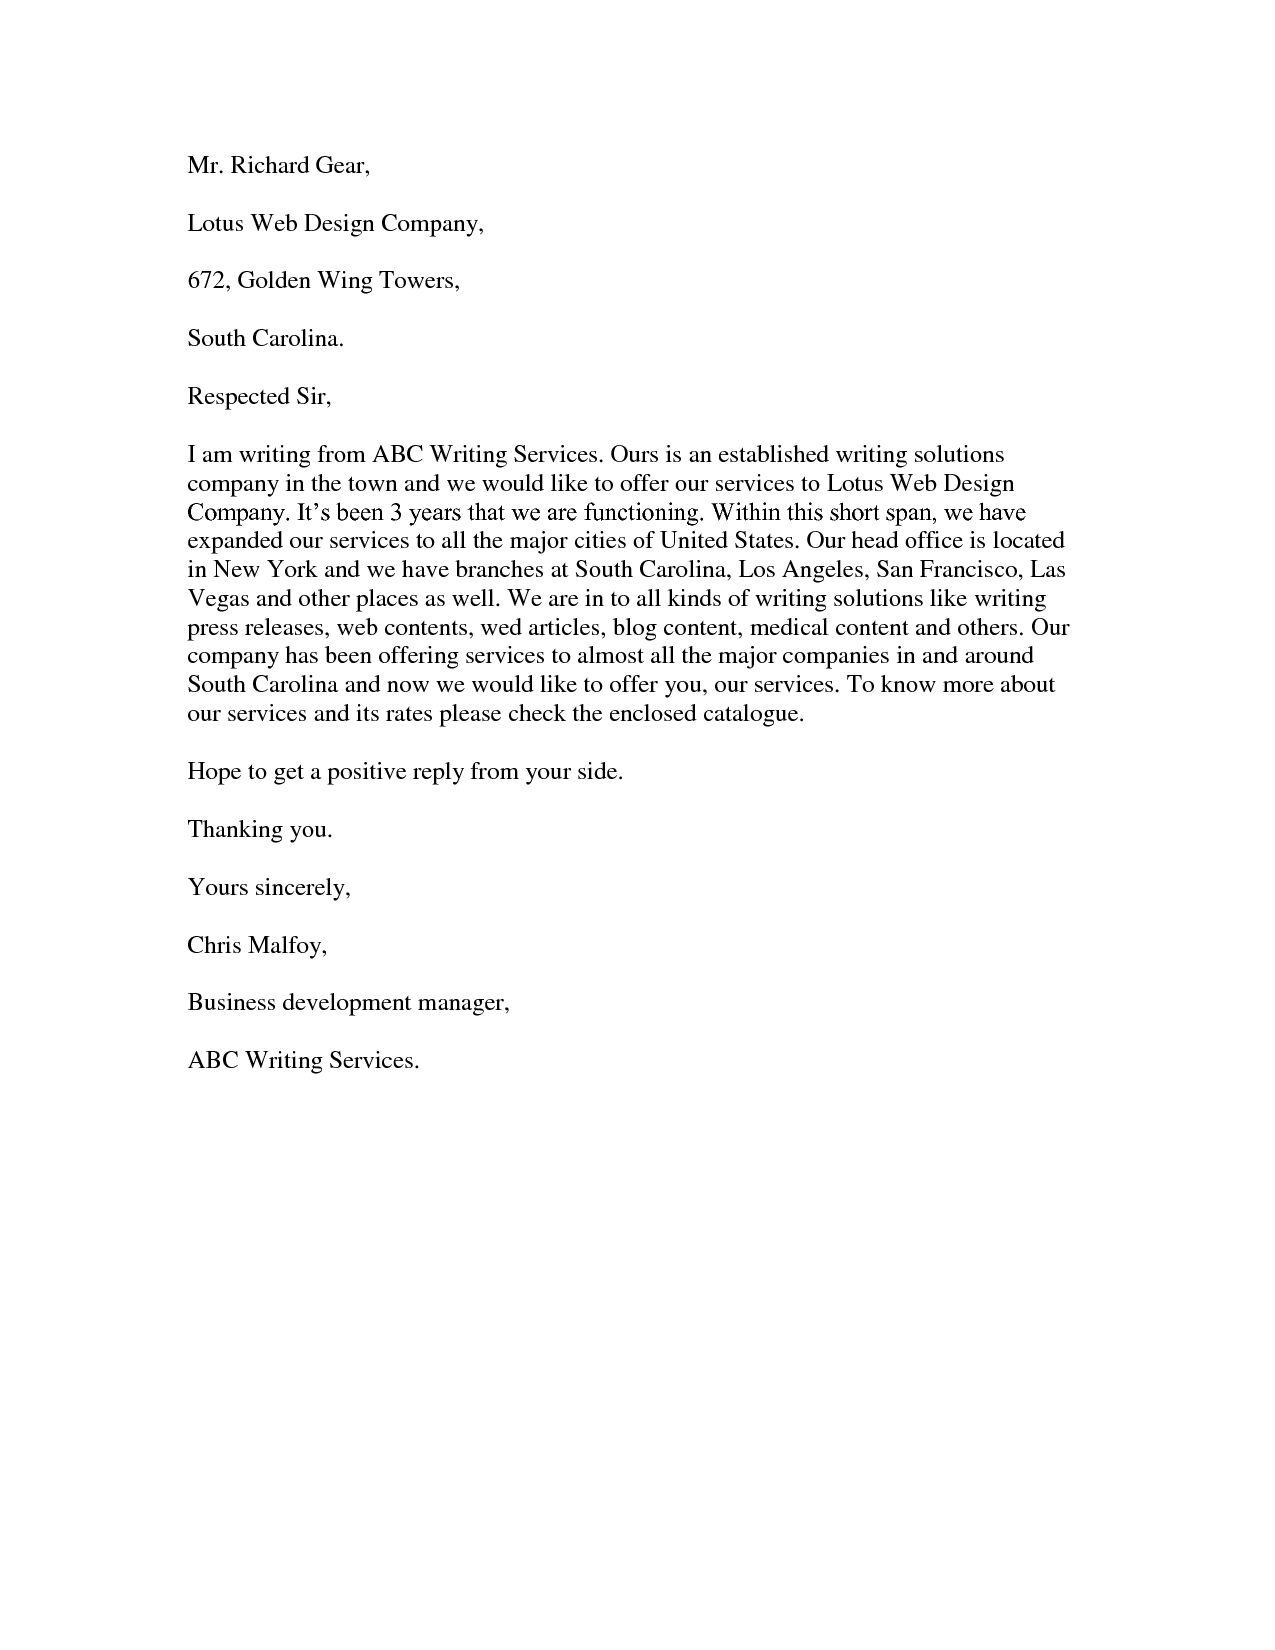 Uncategorized. 8 Letter To Offer Services To A Company: Letter To 